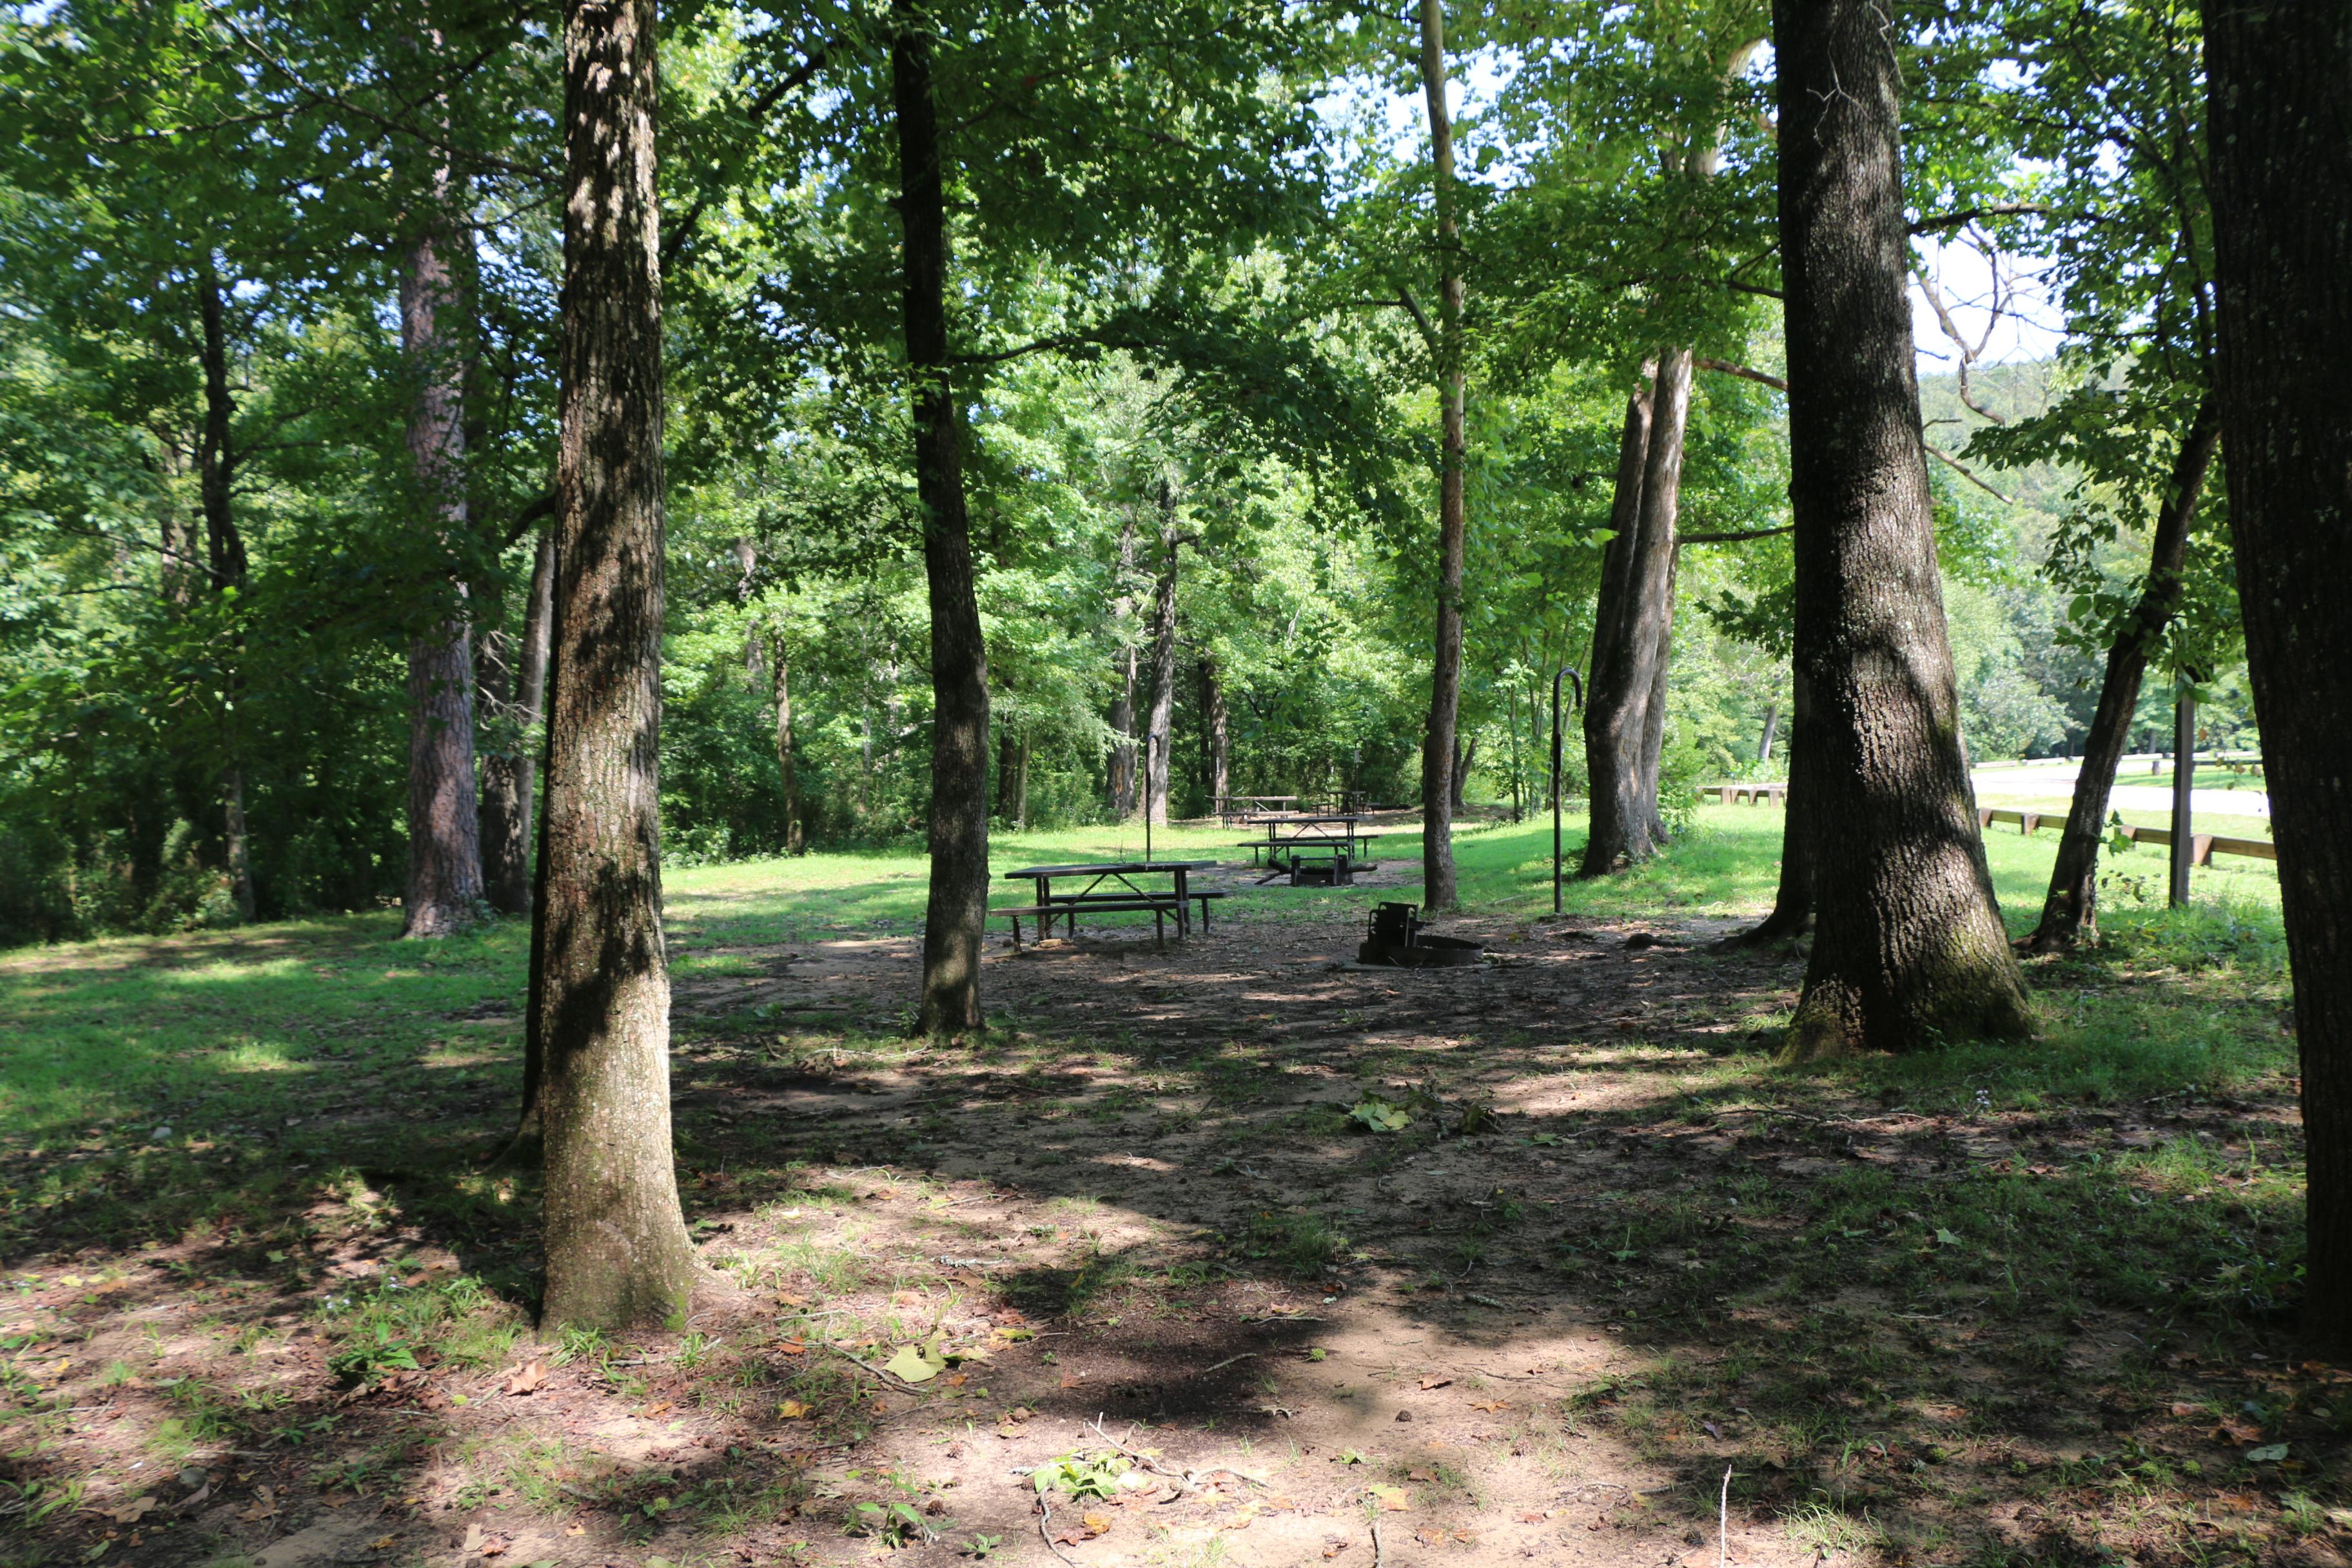 Three campsites marked by picnic tables and fire rings with a mix of shade trees in the sites.